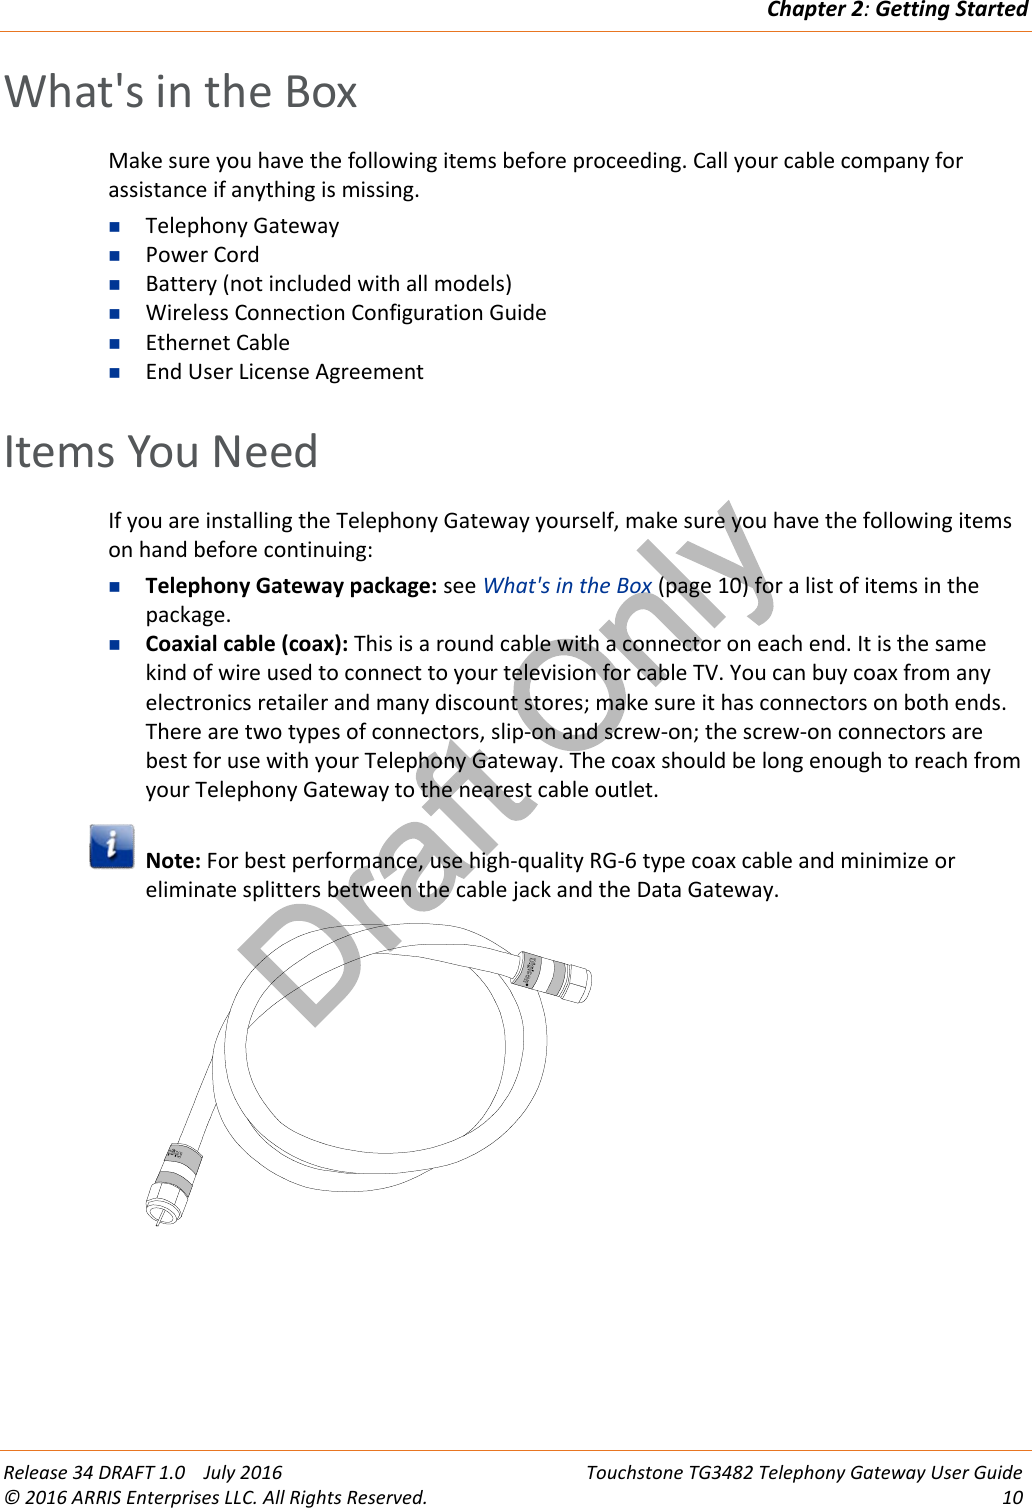 Draft OnlyChapter 2:Getting StartedRelease 34 DRAFT 1.0 July 2016 Touchstone TG3482 Telephony Gateway User Guide© 2016 ARRIS Enterprises LLC. All Rights Reserved. 10What&apos;s in the BoxMake sure you have the following items before proceeding. Call your cable company forassistance if anything is missing.Telephony GatewayPower CordBattery (not included with all models)Wireless Connection Configuration GuideEthernet CableEnd User License AgreementItems You NeedIf you are installing the Telephony Gateway yourself, make sure you have the following itemson hand before continuing:Telephony Gateway package: see What&apos;s in the Box (page 10) for a list of items in thepackage.Coaxial cable (coax): This is a round cable with a connector on each end. It is the samekind of wire used to connect to your television for cable TV. You can buy coax from anyelectronics retailer and many discount stores; make sure it has connectors on both ends.There are two types of connectors, slip-on and screw-on; the screw-on connectors arebest for use with your Telephony Gateway. The coax should be long enough to reach fromyour Telephony Gateway to the nearest cable outlet.Note: For best performance, use high-quality RG-6 type coax cable and minimize oreliminate splitters between the cable jack and the Data Gateway.